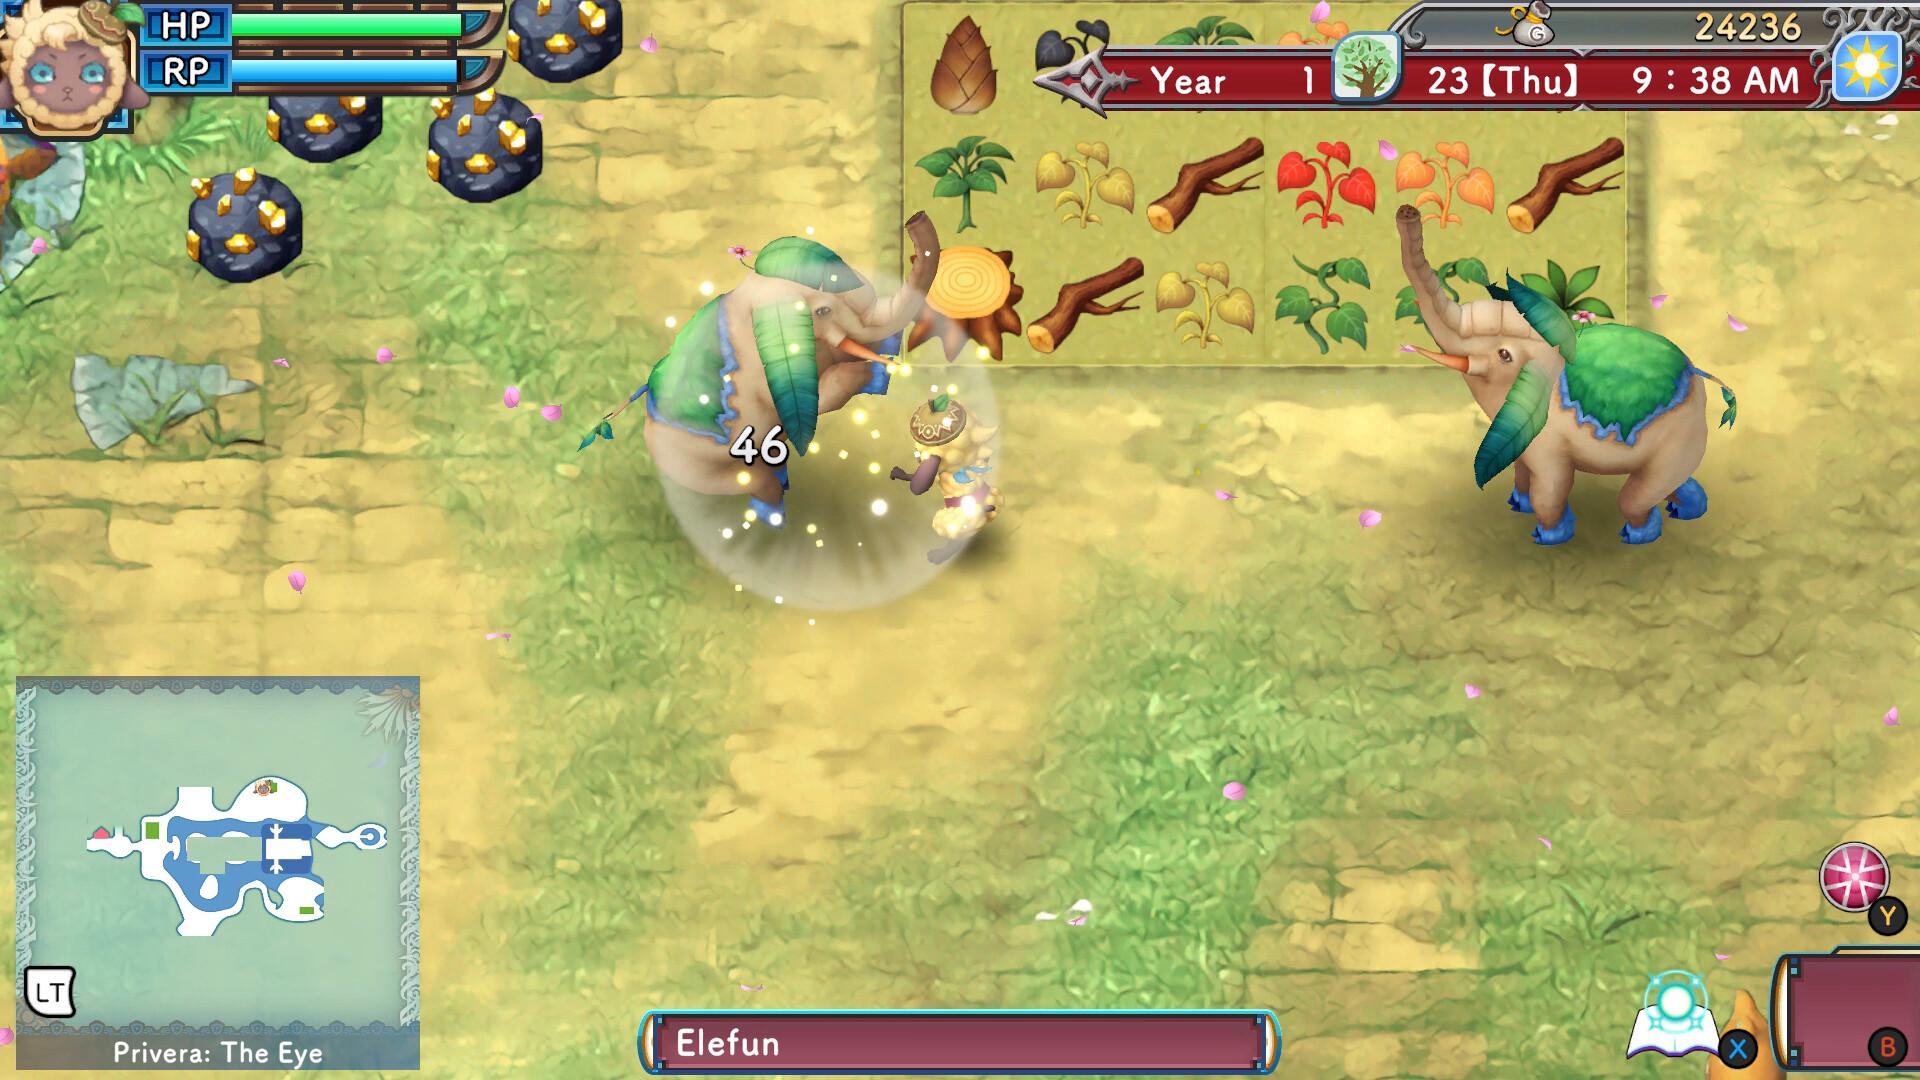 Screenshot №1 from game Rune Factory 3 Special